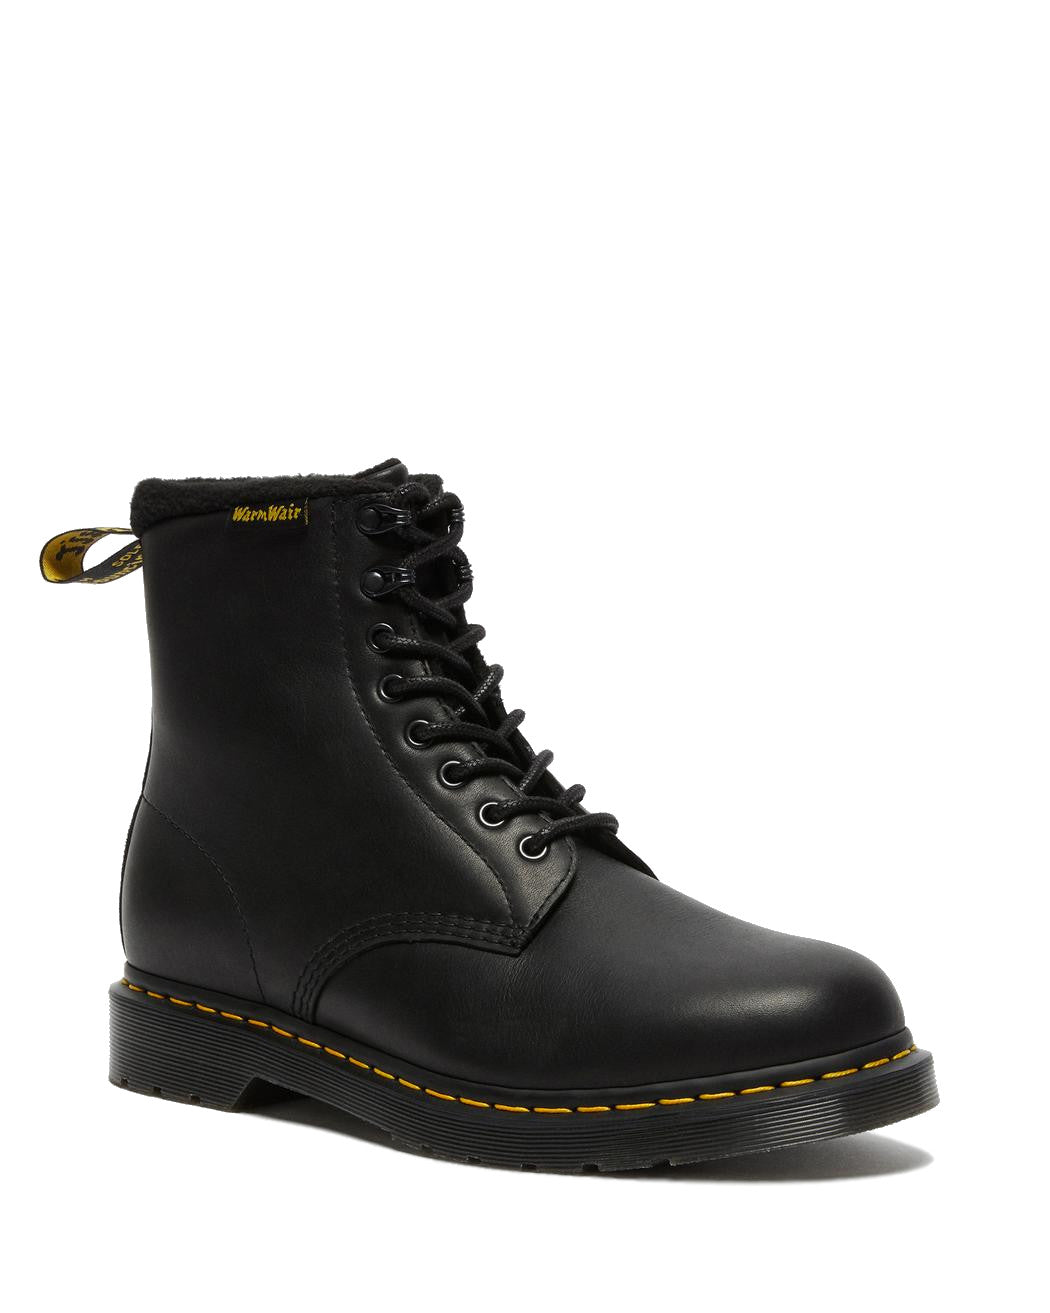 Dr Martens Men's 1460 Pascal Warmwair Water Resistant Leather Lace Up Boots - Black